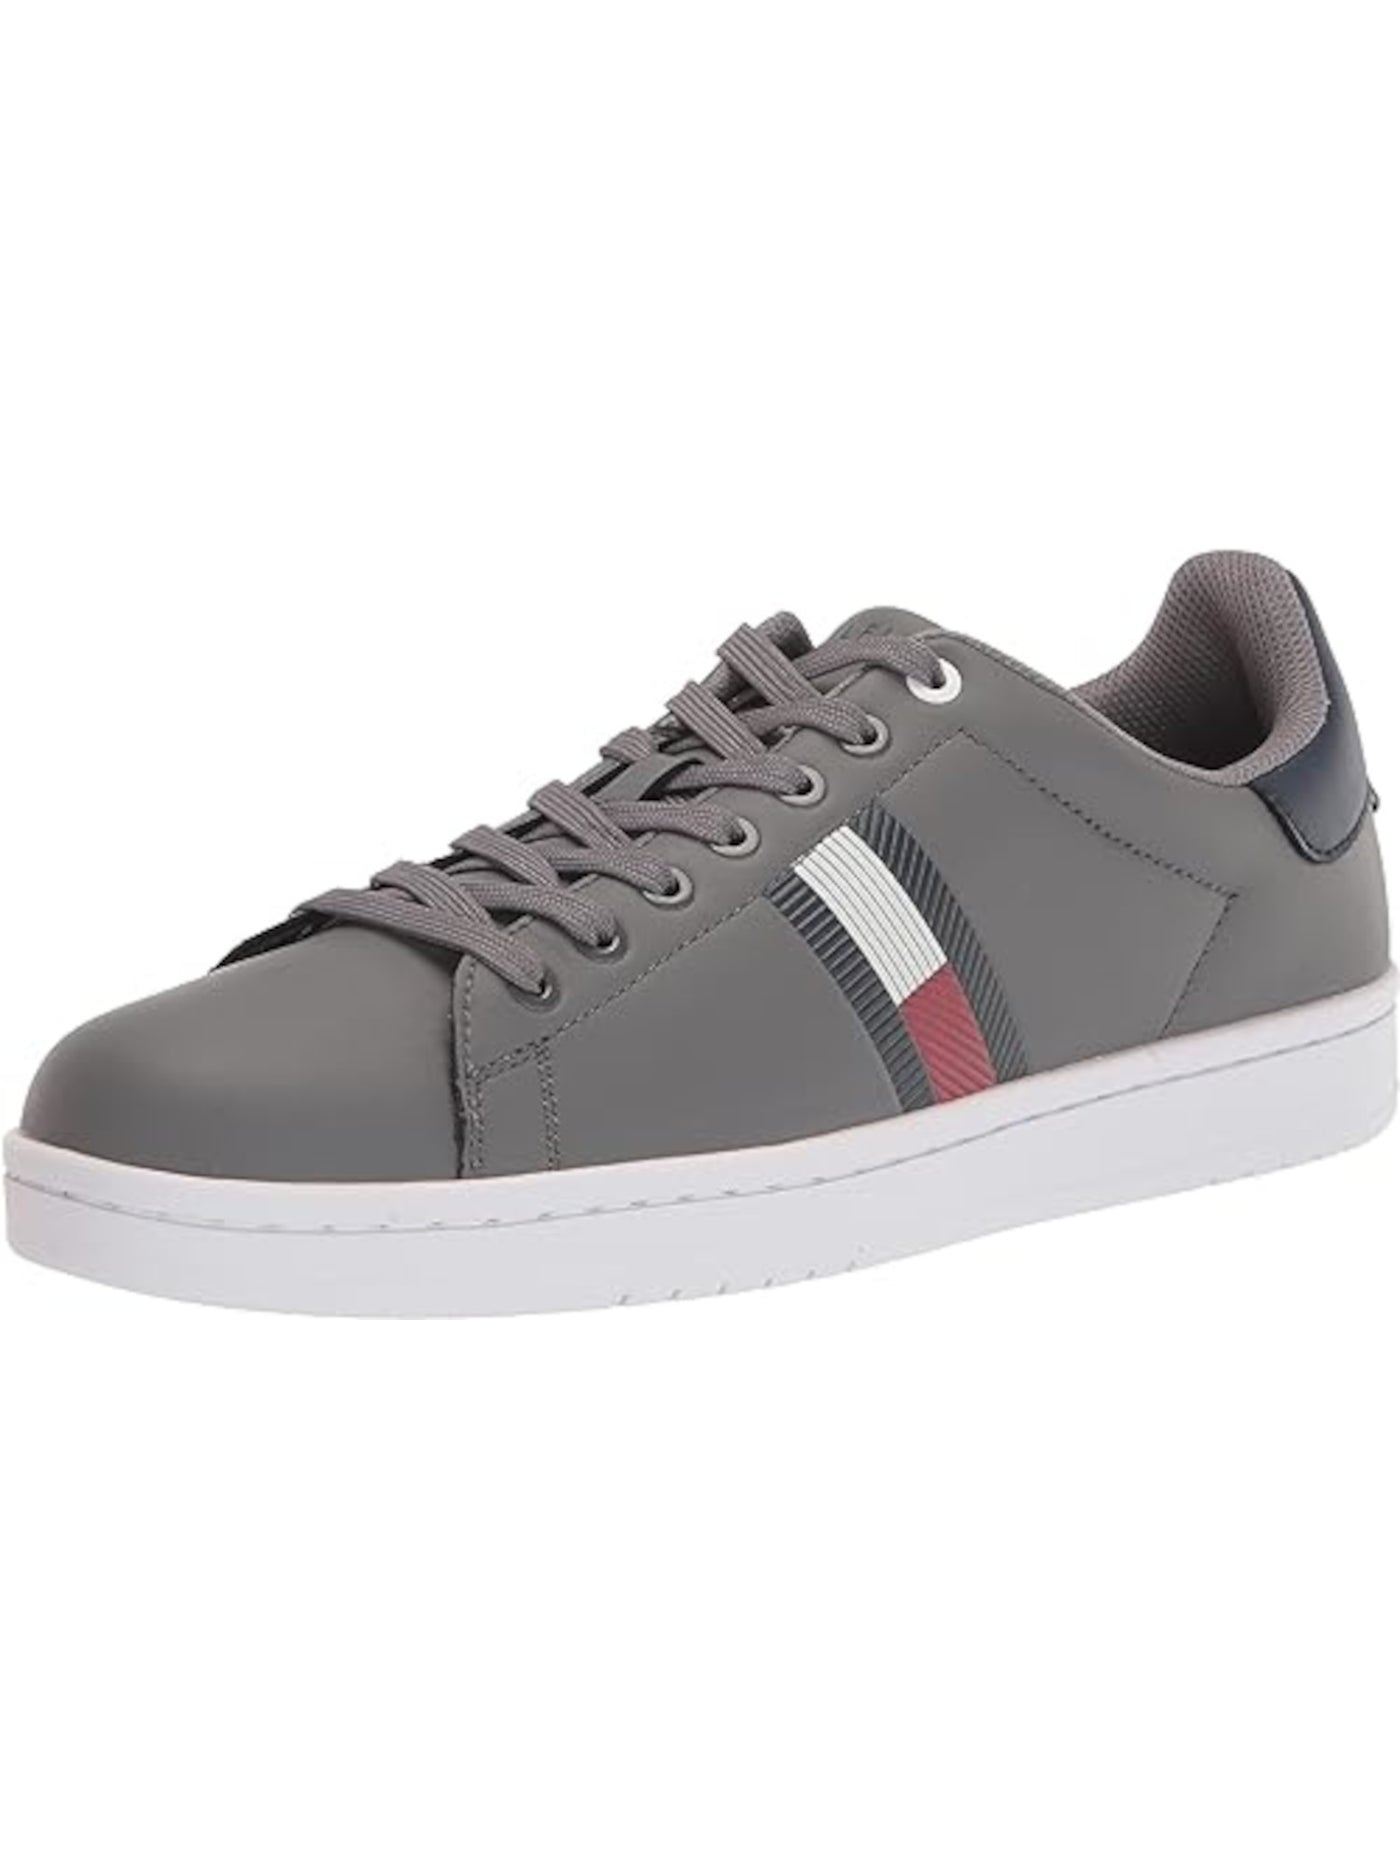 TOMMY HILFIGER Mens Gray Removable Insole Logo Lampkin Round Toe Platform Lace-Up Sneakers Shoes 8